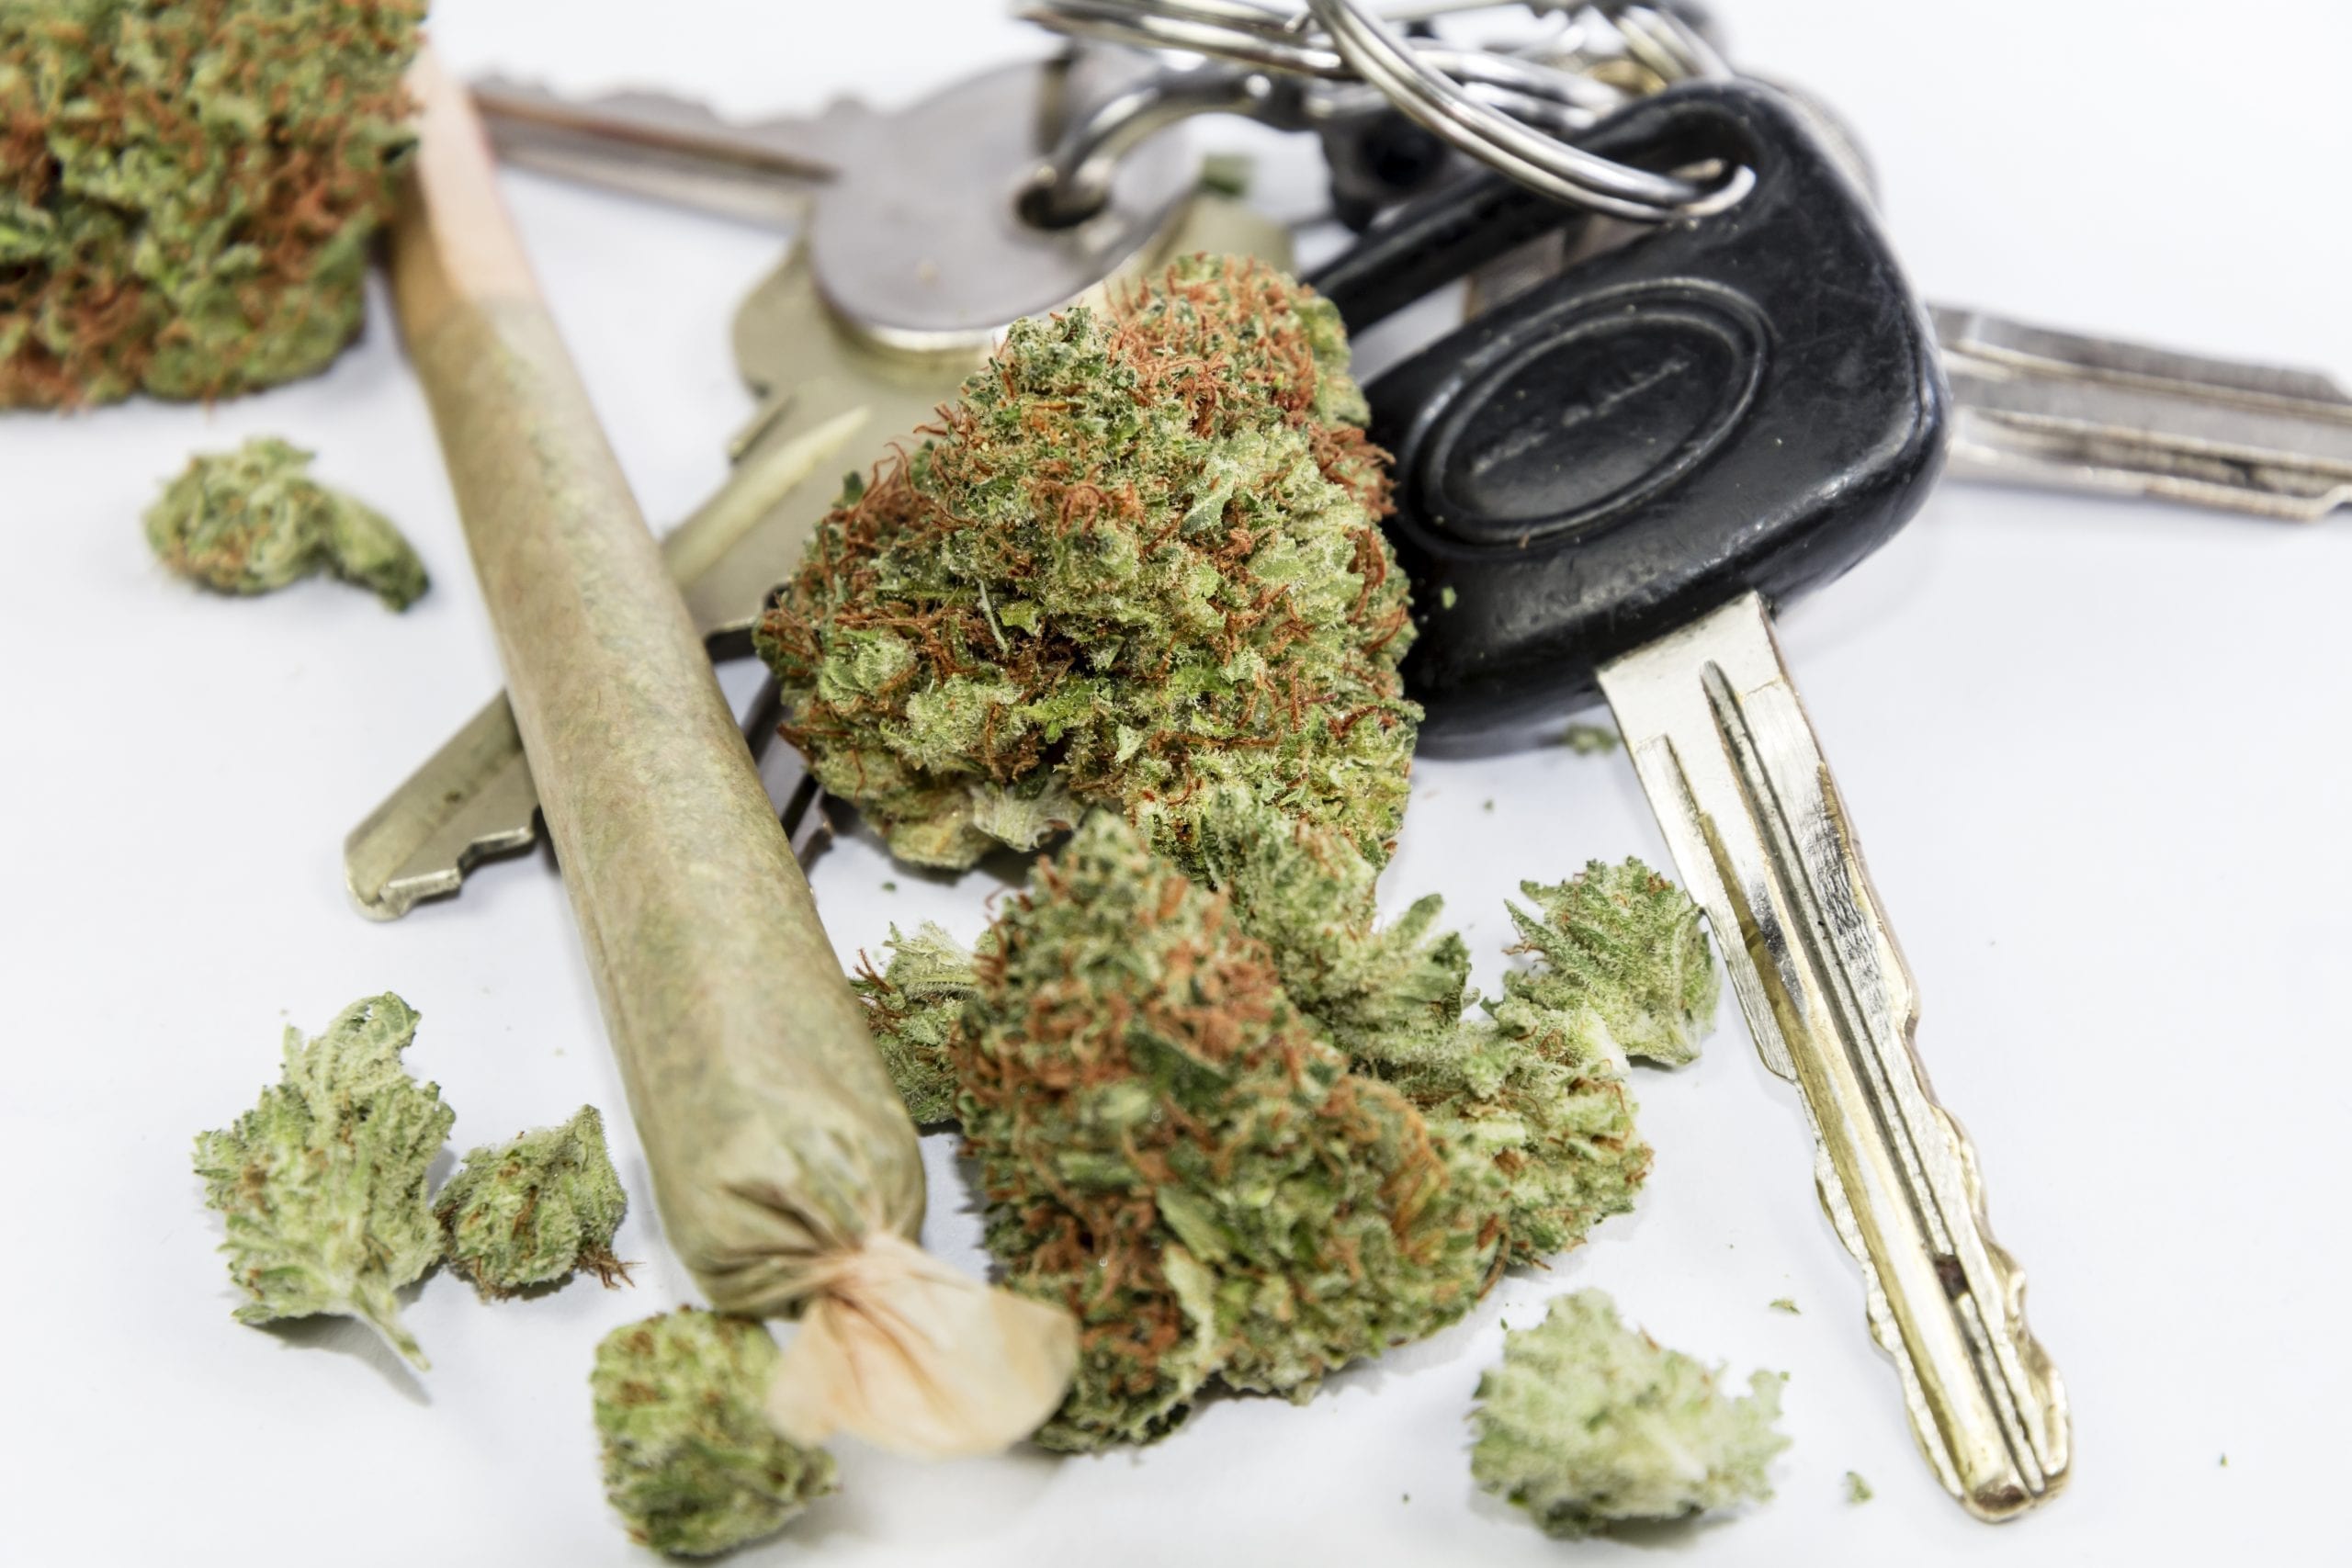 States with Legalized Marijuana Show Increase in Car Accidents